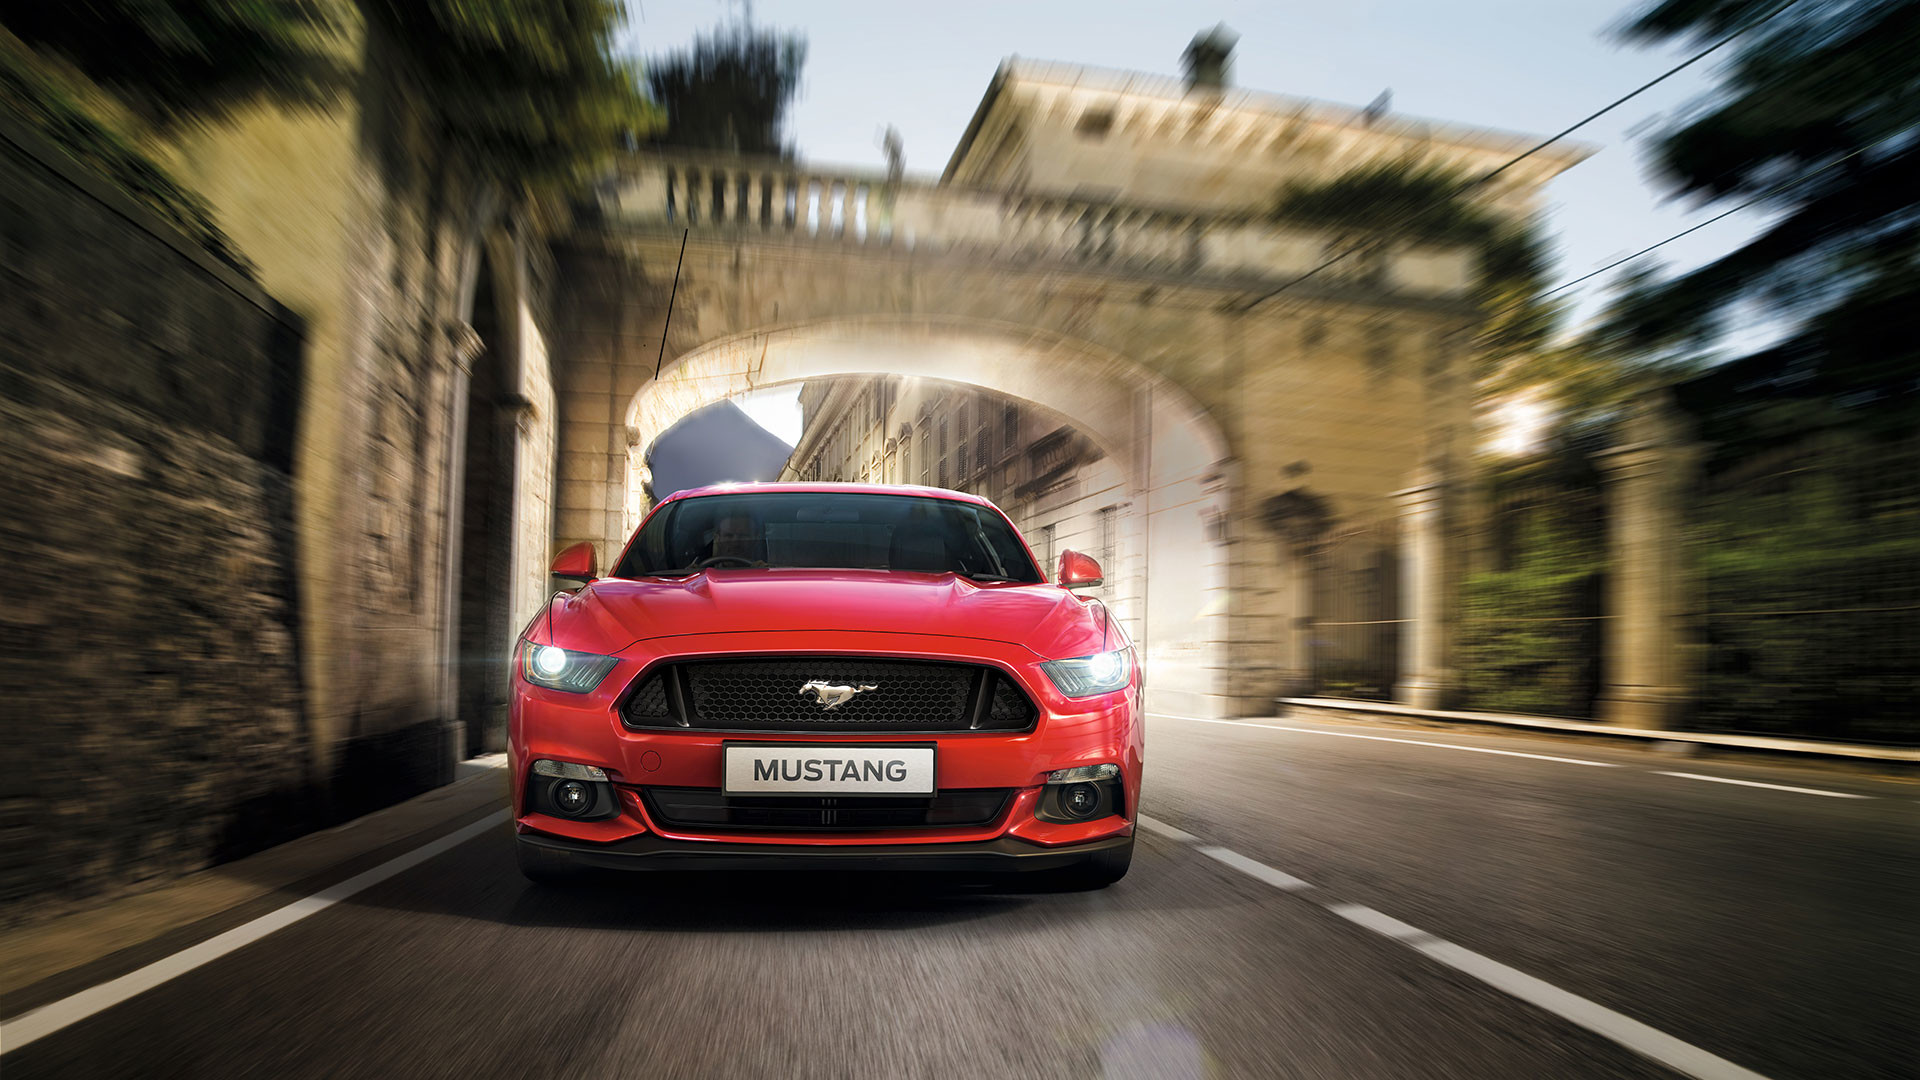 1920x1080 Top Large Luxury Ford Mustang Hd Wallpapers For Android Research New